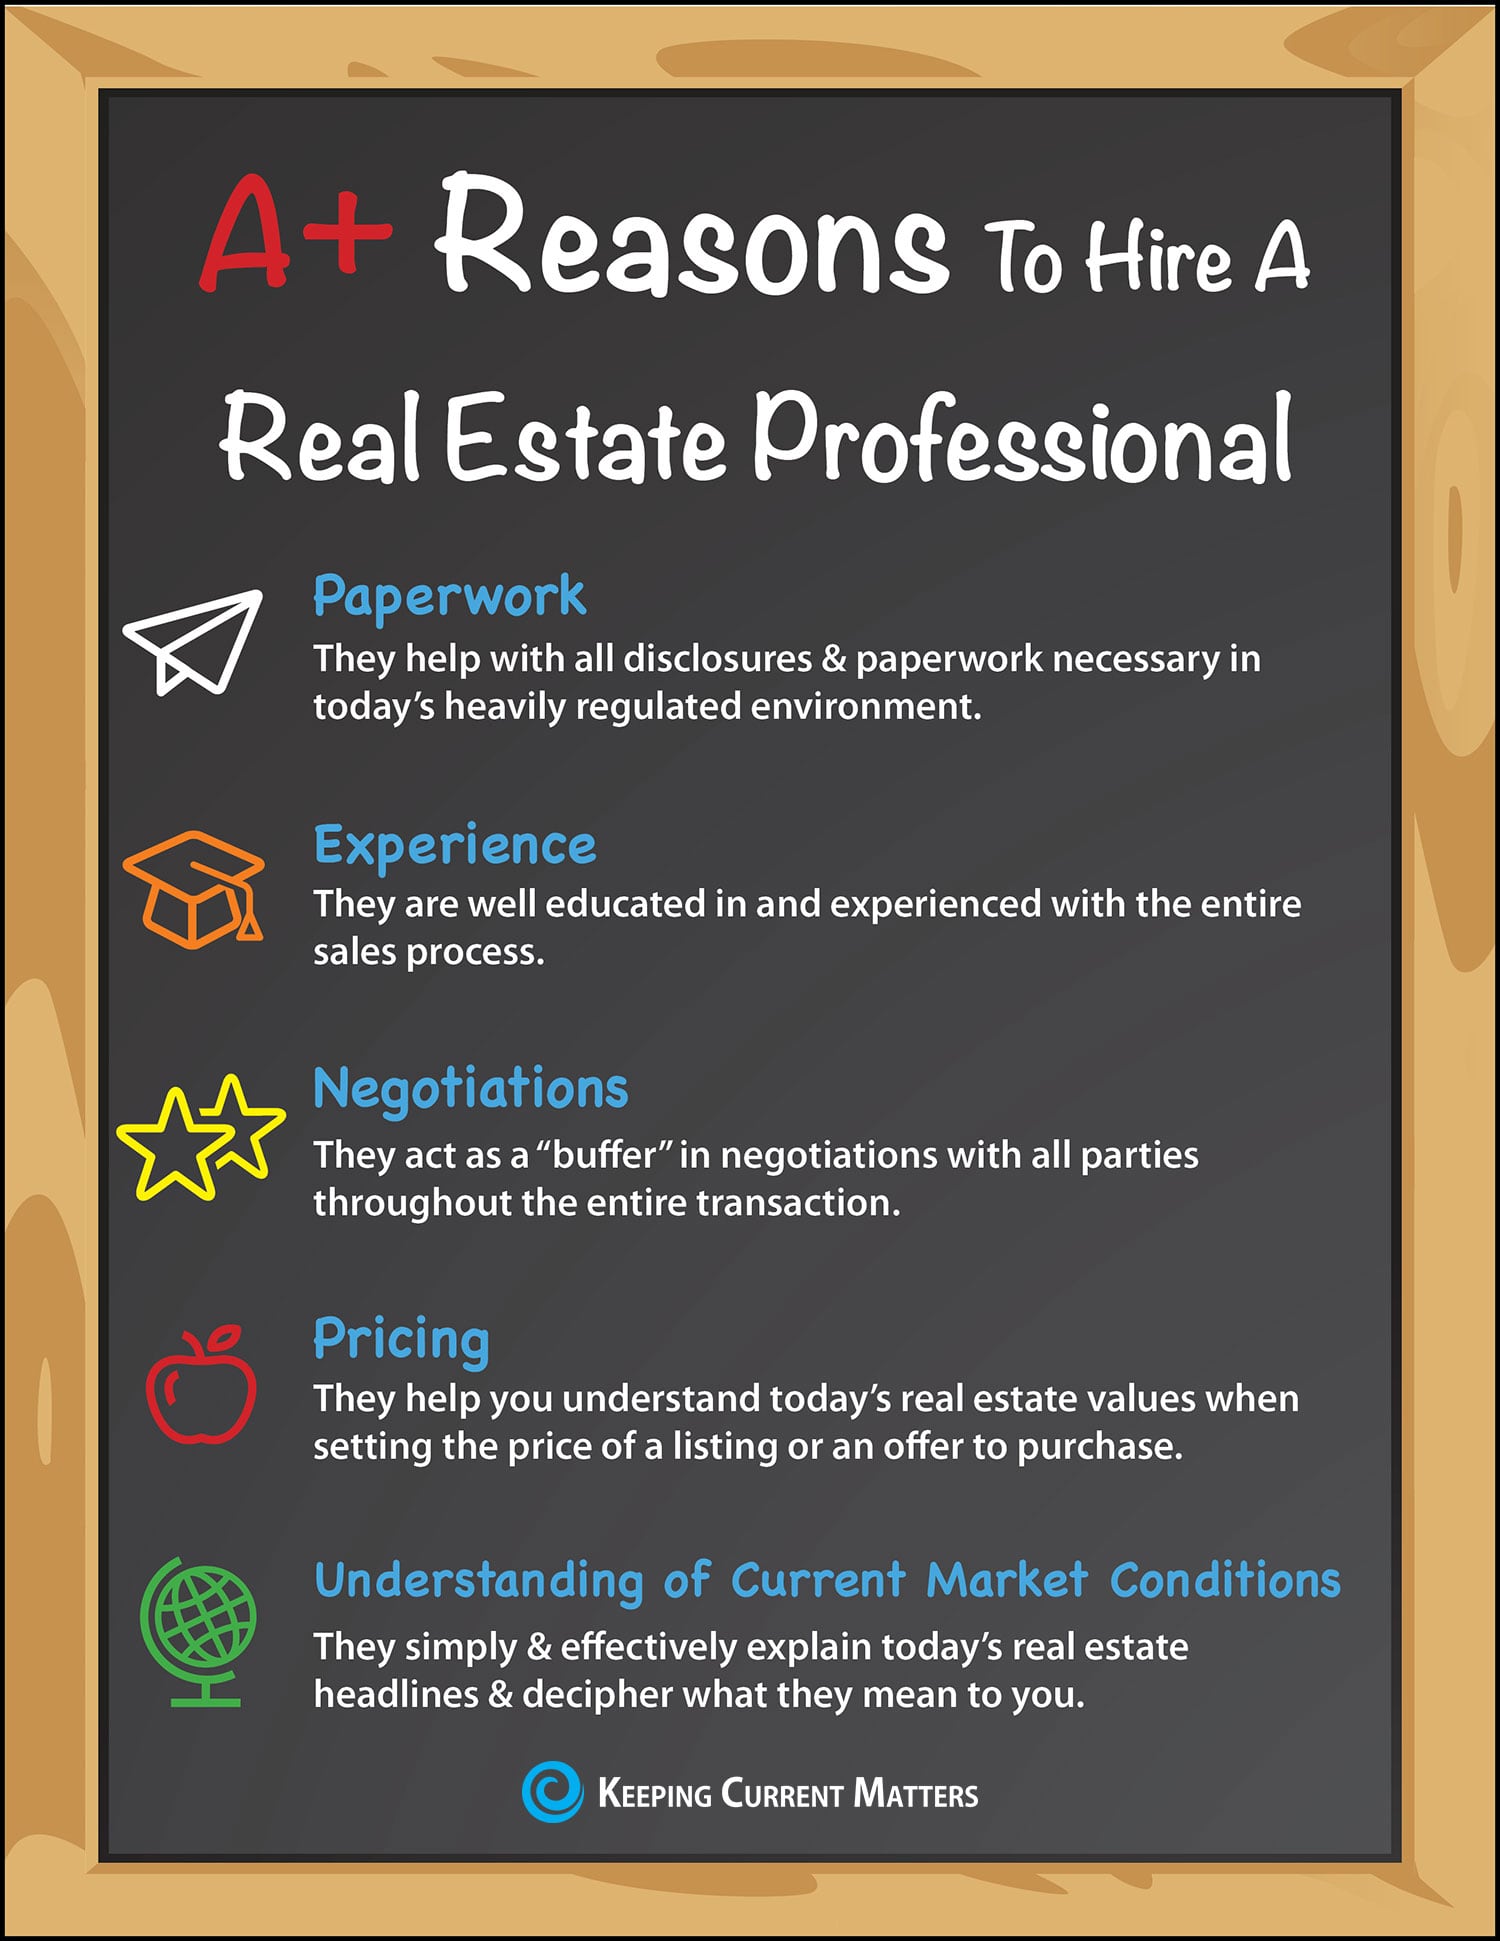 Reason to Hire A Real Estate Professional